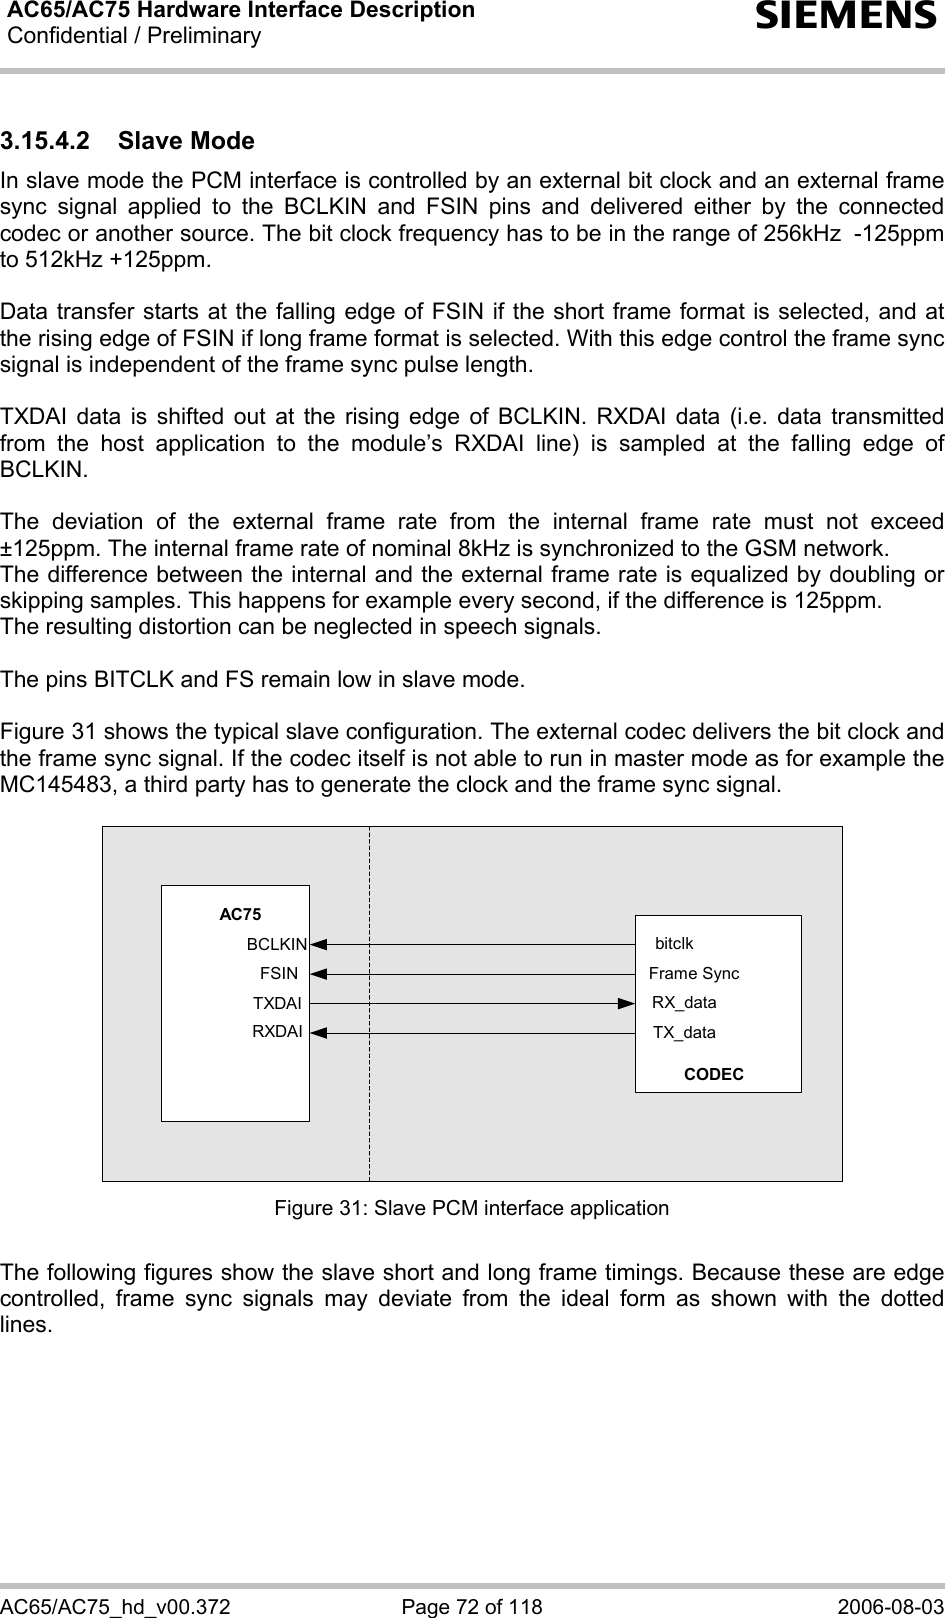 AC65/AC75 Hardware Interface Description Confidential / Preliminary   s AC65/AC75_hd_v00.372  Page 72 of 118  2006-08-03 3.15.4.2 Slave Mode In slave mode the PCM interface is controlled by an external bit clock and an external frame sync signal applied to the BCLKIN and FSIN pins and delivered either by the connected codec or another source. The bit clock frequency has to be in the range of 256kHz  -125ppm to 512kHz +125ppm.  Data transfer starts at the falling edge of FSIN if the short frame format is selected, and at the rising edge of FSIN if long frame format is selected. With this edge control the frame sync signal is independent of the frame sync pulse length.  TXDAI data is shifted out at the rising edge of BCLKIN. RXDAI data (i.e. data transmitted from the host application to the module’s RXDAI line) is sampled at the falling edge of BCLKIN.  The deviation of the external frame rate from the internal frame rate must not exceed ±125ppm. The internal frame rate of nominal 8kHz is synchronized to the GSM network.  The difference between the internal and the external frame rate is equalized by doubling or skipping samples. This happens for example every second, if the difference is 125ppm. The resulting distortion can be neglected in speech signals.  The pins BITCLK and FS remain low in slave mode.  Figure 31 shows the typical slave configuration. The external codec delivers the bit clock and the frame sync signal. If the codec itself is not able to run in master mode as for example the MC145483, a third party has to generate the clock and the frame sync signal.  BCLKINFSINTXDAIRXDAIbitclkFrame SyncTX_dataRX_dataCODECAC75 Figure 31: Slave PCM interface application  The following figures show the slave short and long frame timings. Because these are edge controlled, frame sync signals may deviate from the ideal form as shown with the dotted lines.  